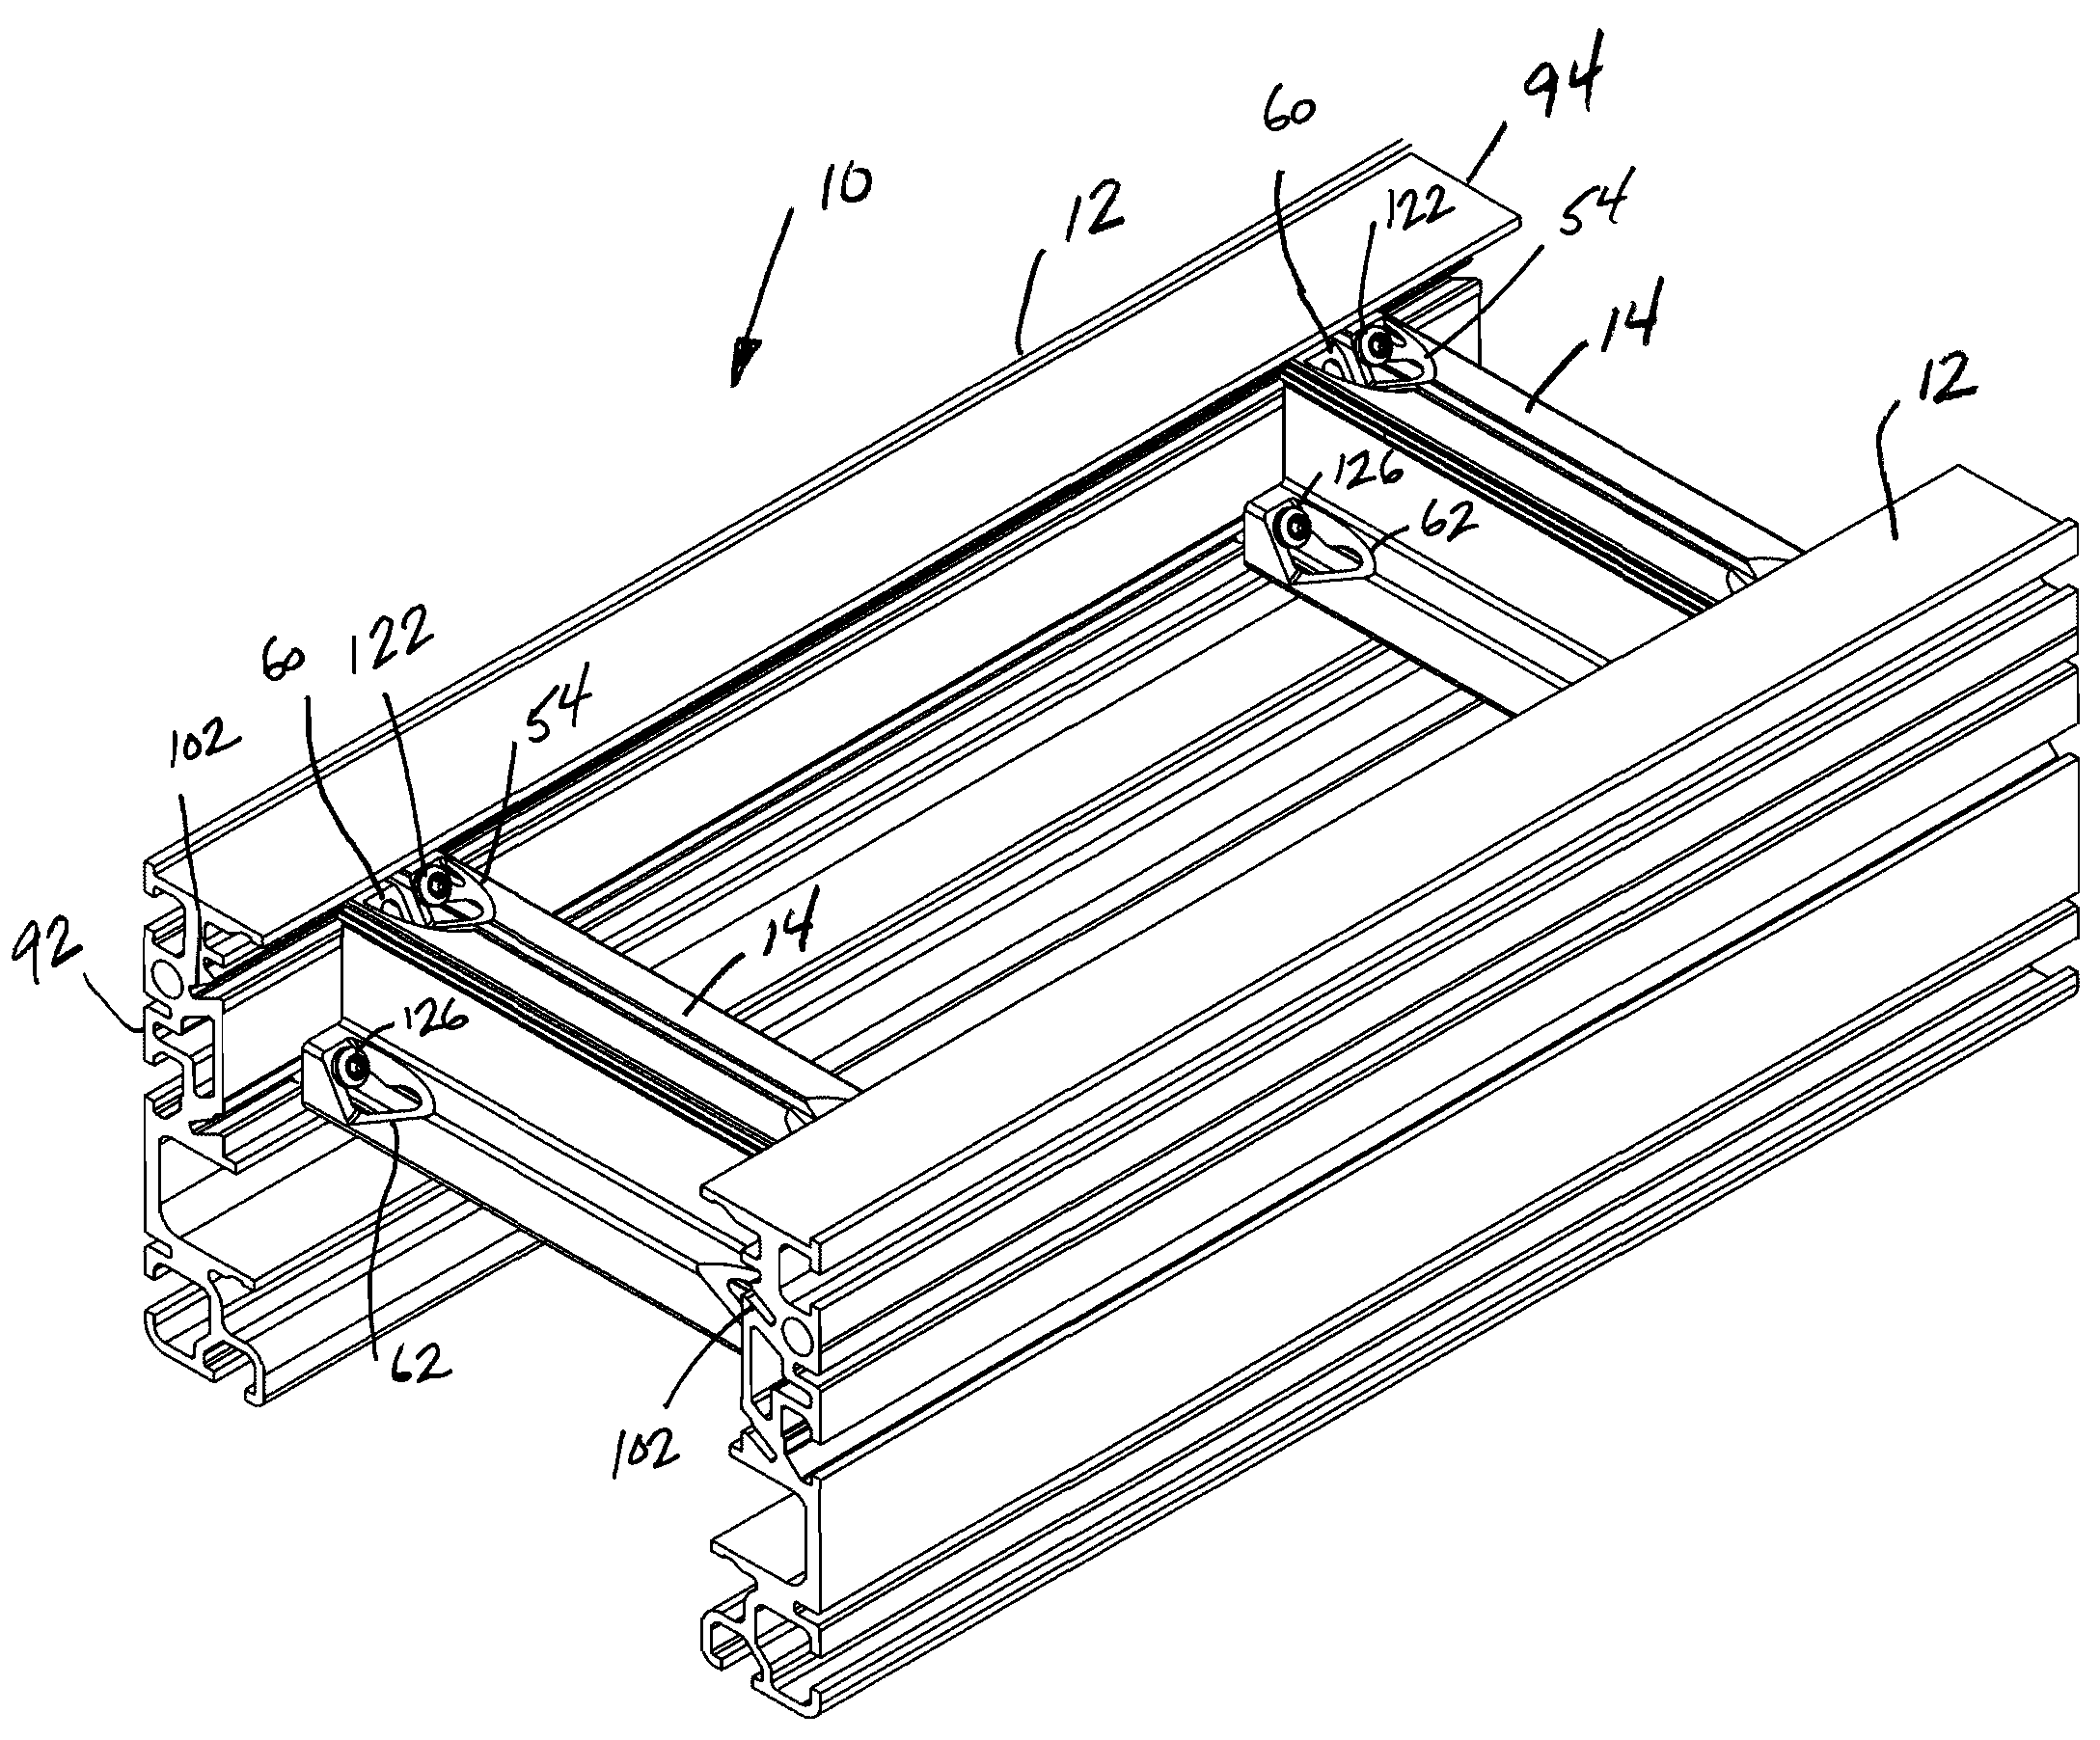 Conveyor frame assembly having side rails including multiple attachment slots and adjustable cross supports